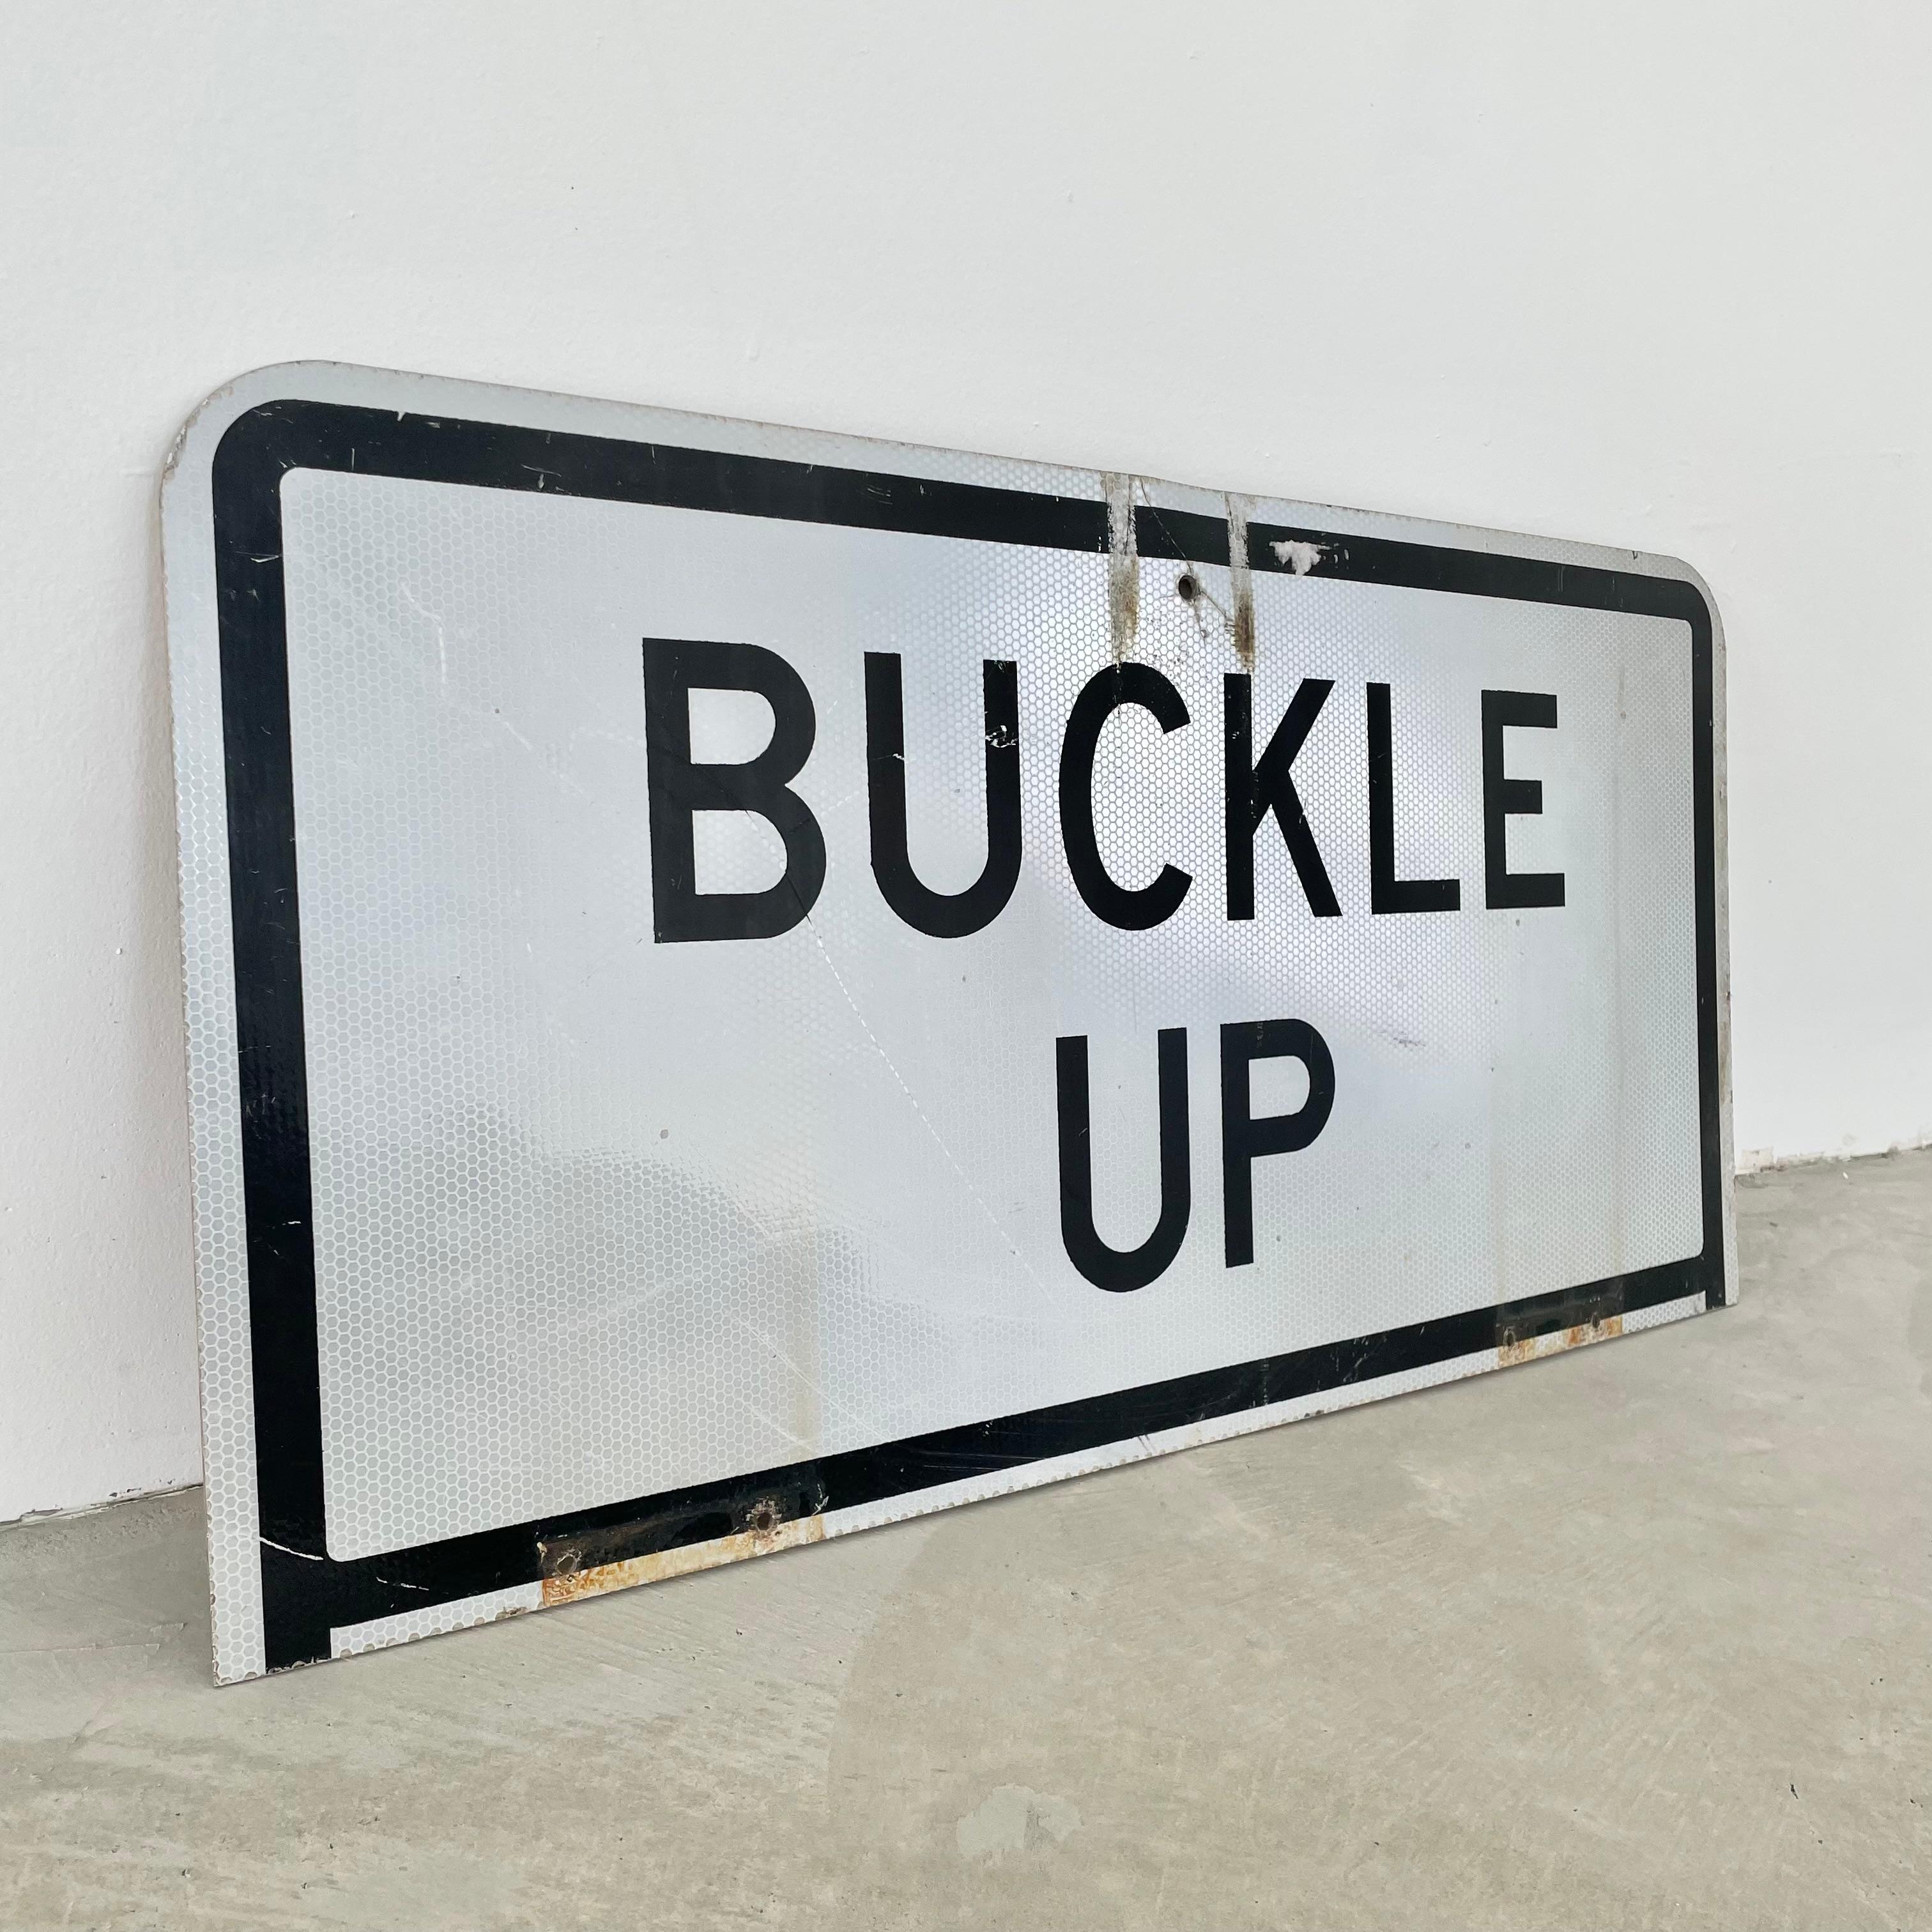 Vintage Buckle Up sign. White reflective background with micro honeycomb pattern. Black lettering and great patina. Reverse side is 